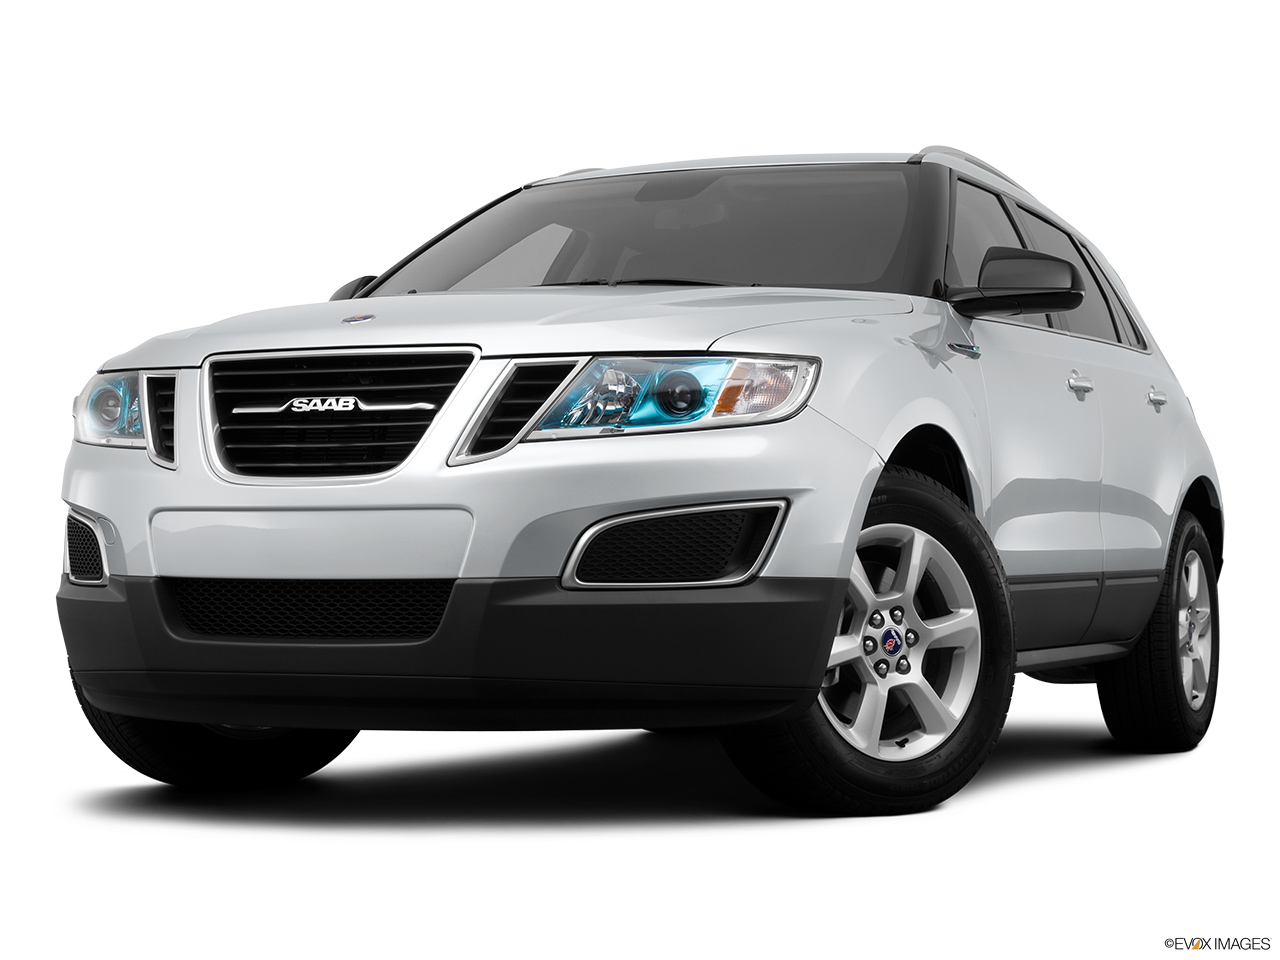 2011 Saab 9-4X 3.0i Front angle view, low wide perspective. 